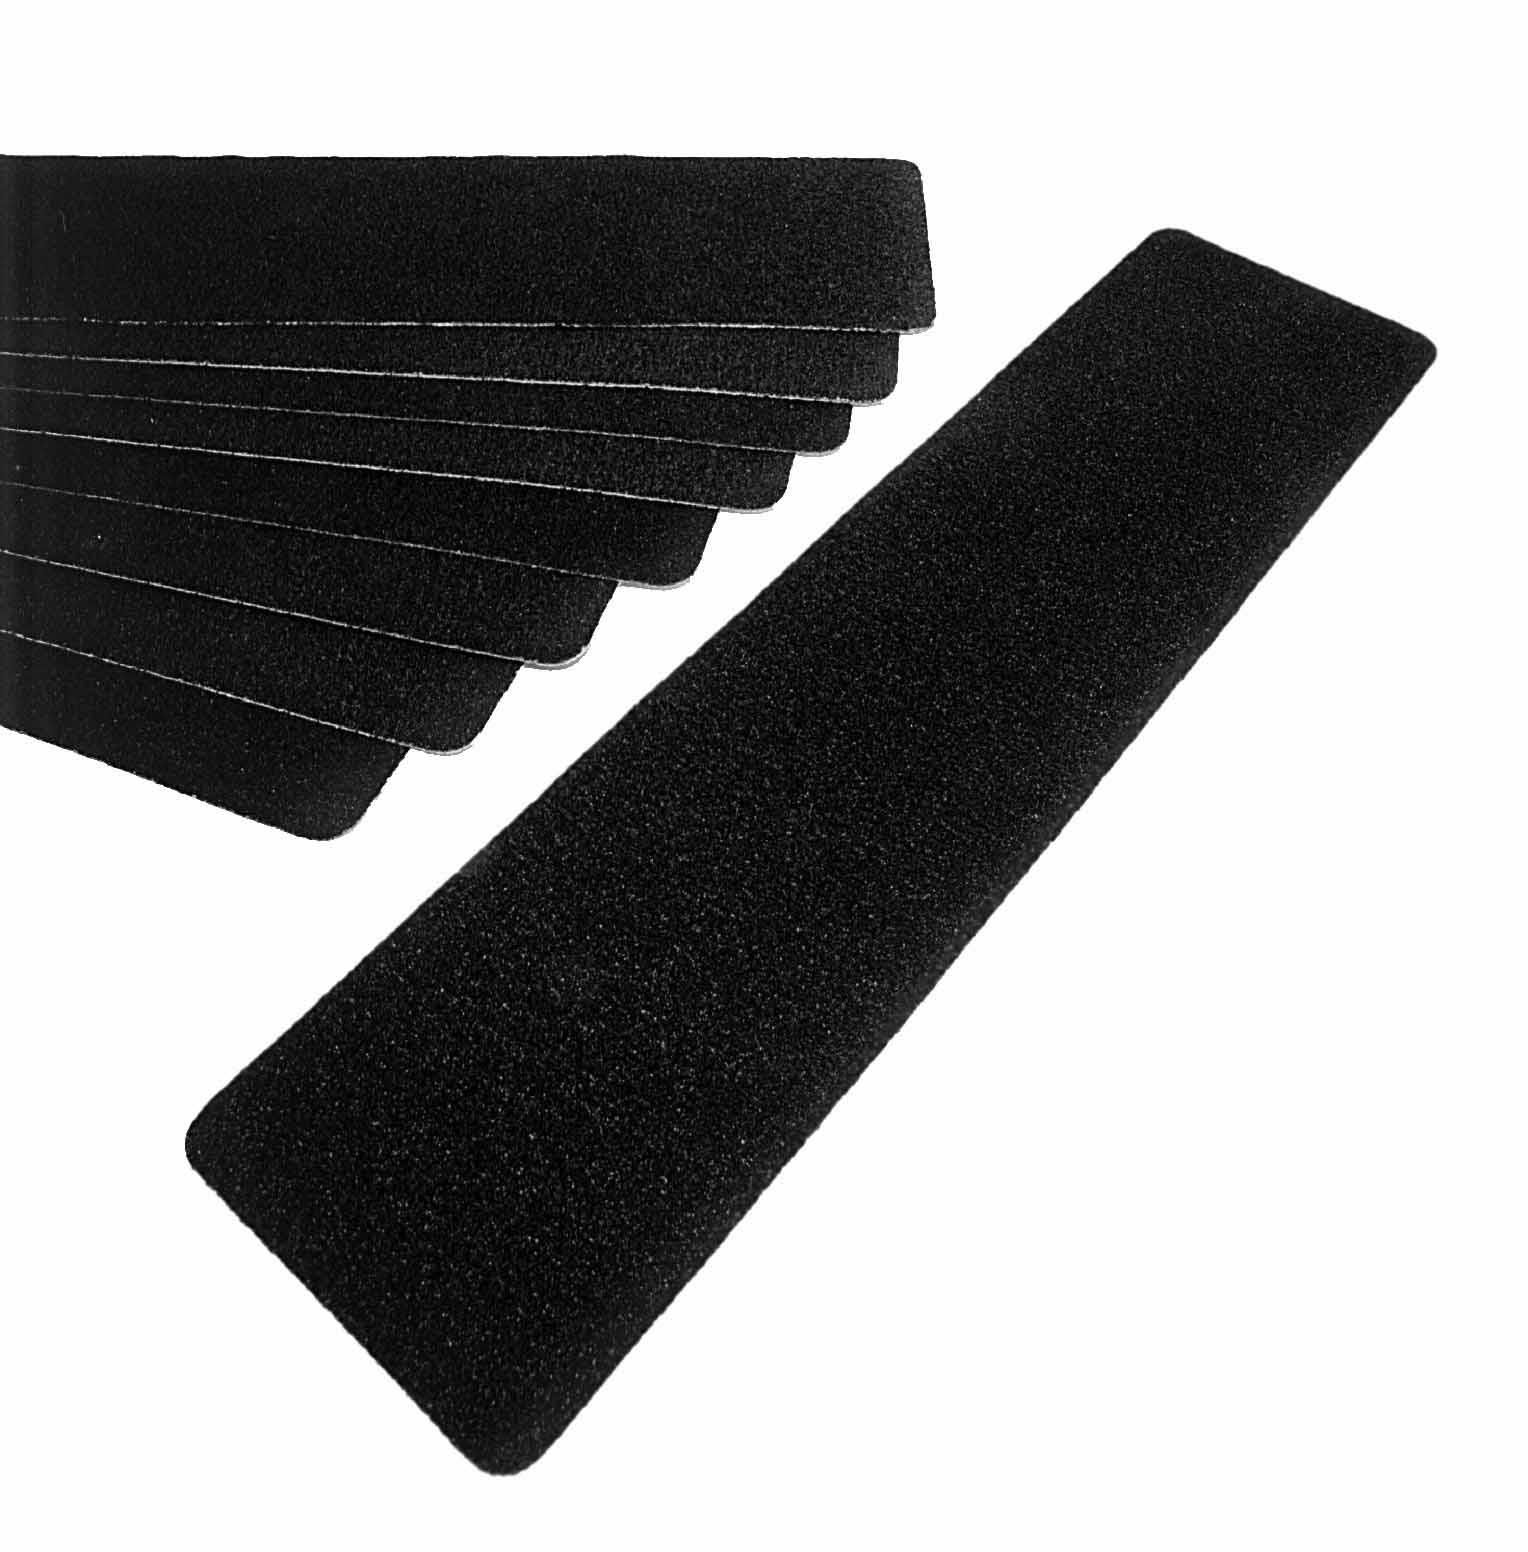 Buy Non Slip Tape And Other Treads For Your Floor Ramps Bathtub Throughout Adhesive Carpet Strips For Stairs (View 14 of 20)